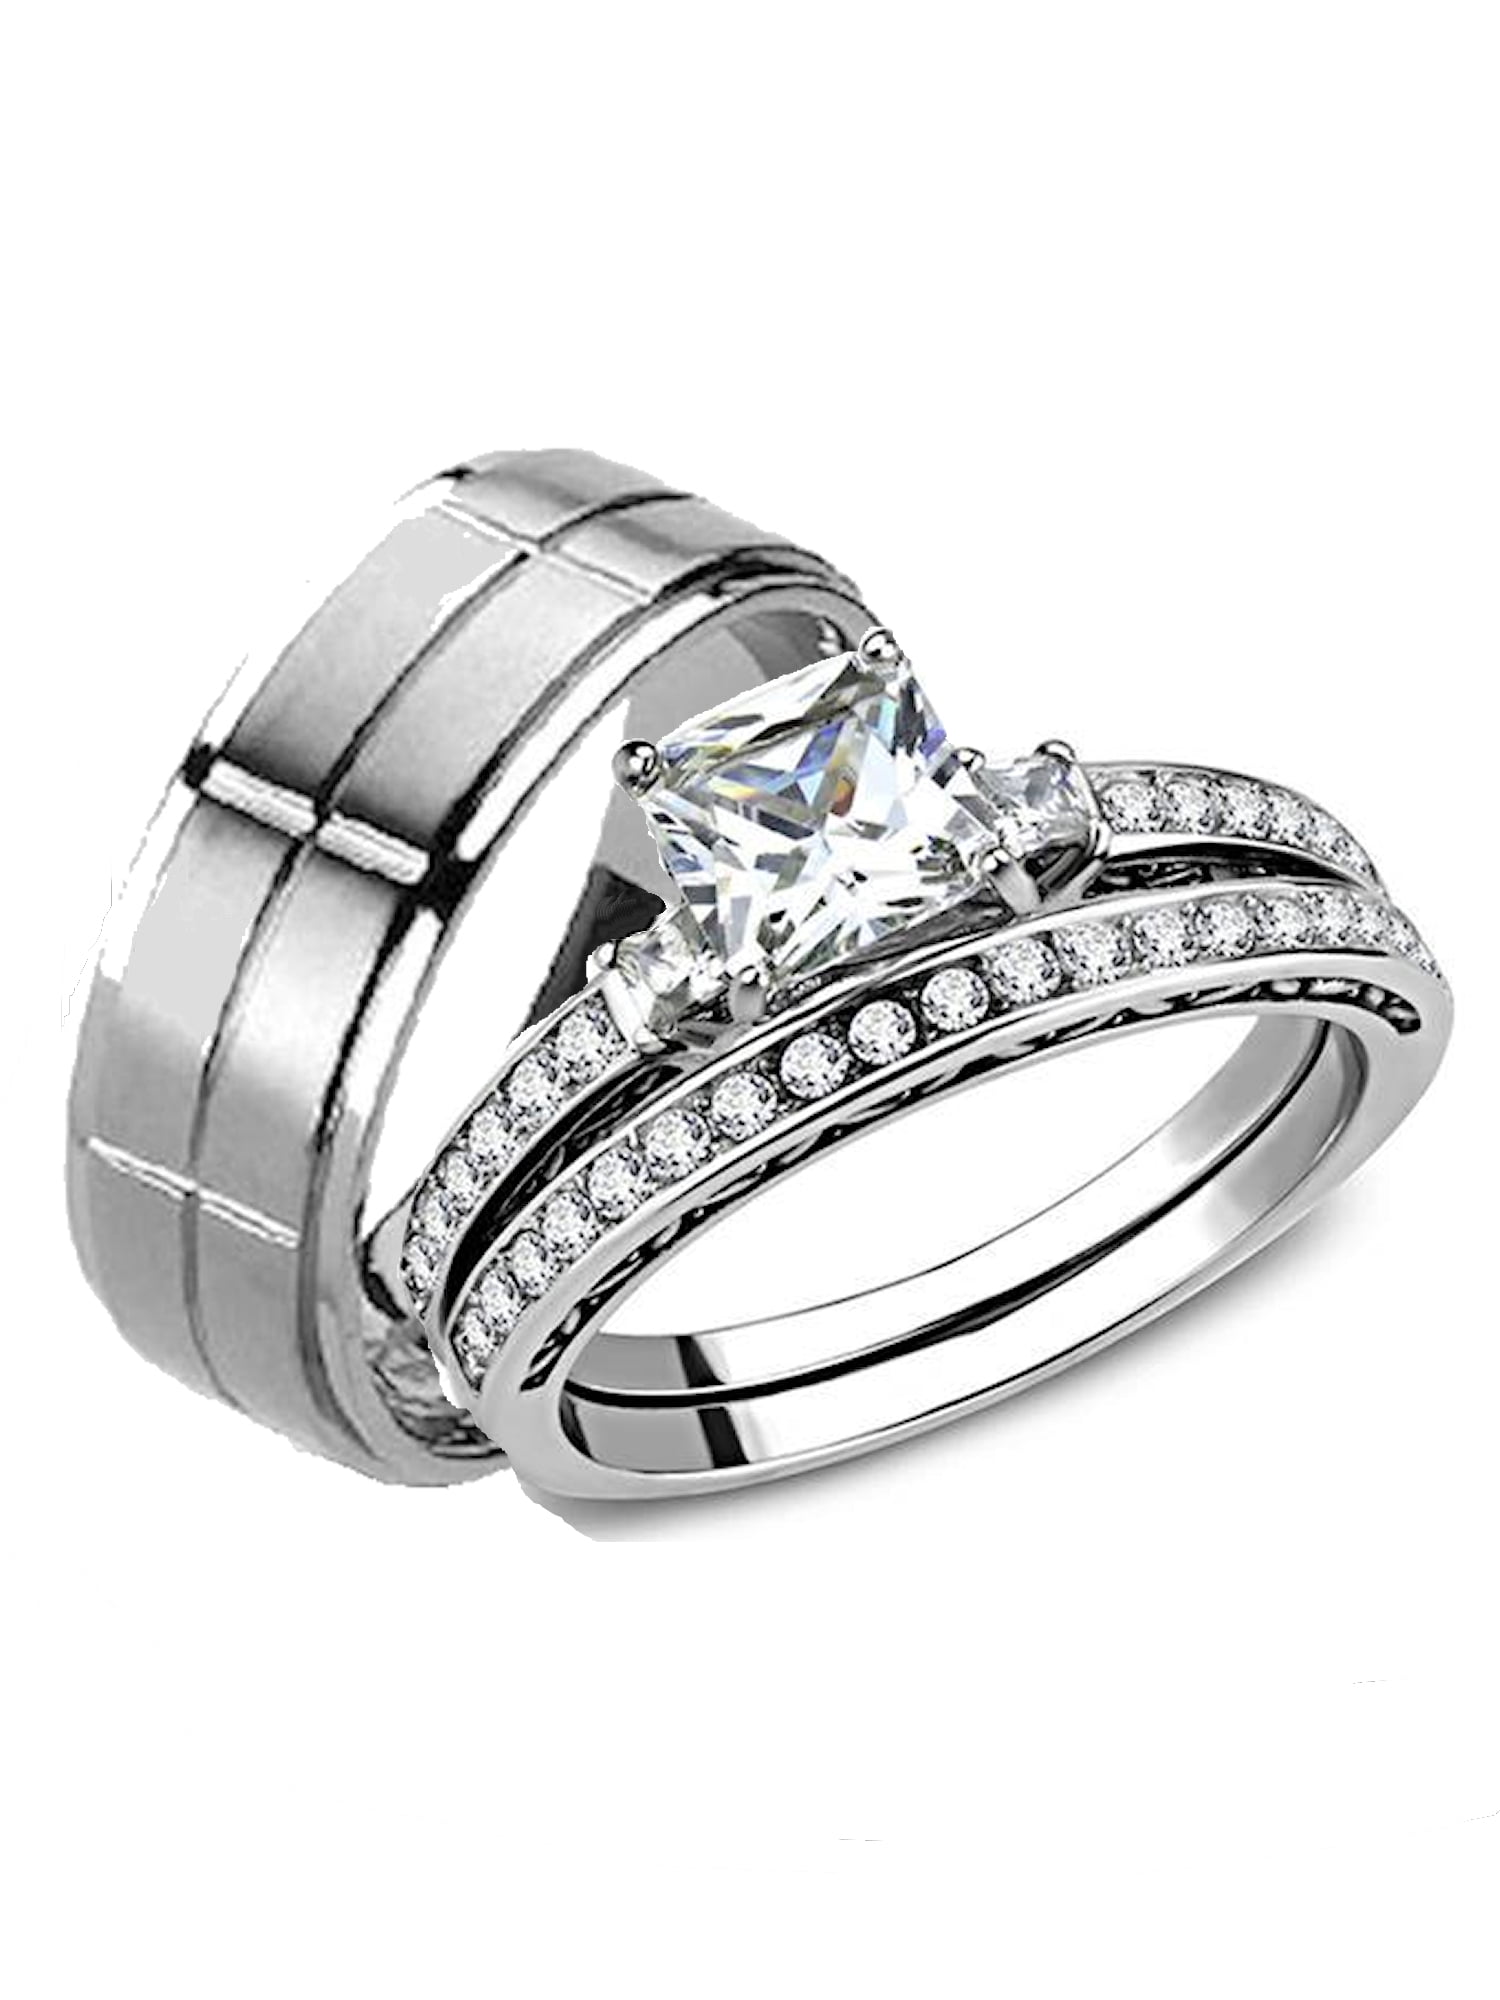 3 Three-Stone Engagement Ring Match Wedding Band CZ Set His Hers Stainless Steel 